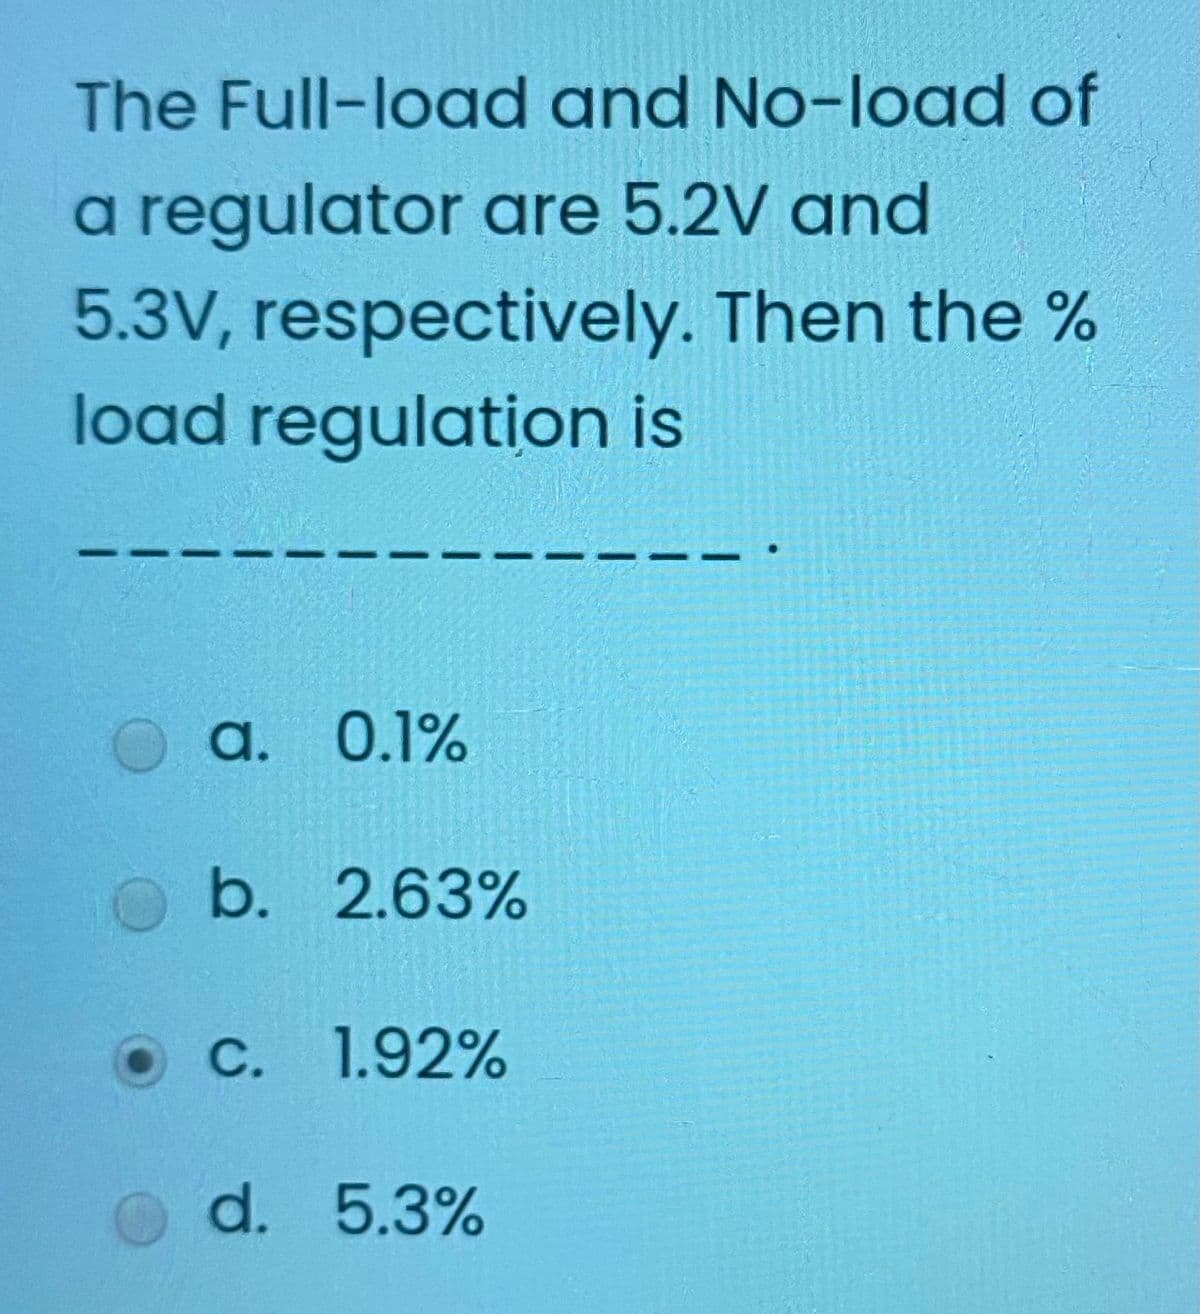 The Full-looad and No-load of
a regulator are 5.2V and
5.3V, respectively. Then the %
load regulation is
а. 0.1%
b. 2.63%
C. 1.92%
d. 5.3%
